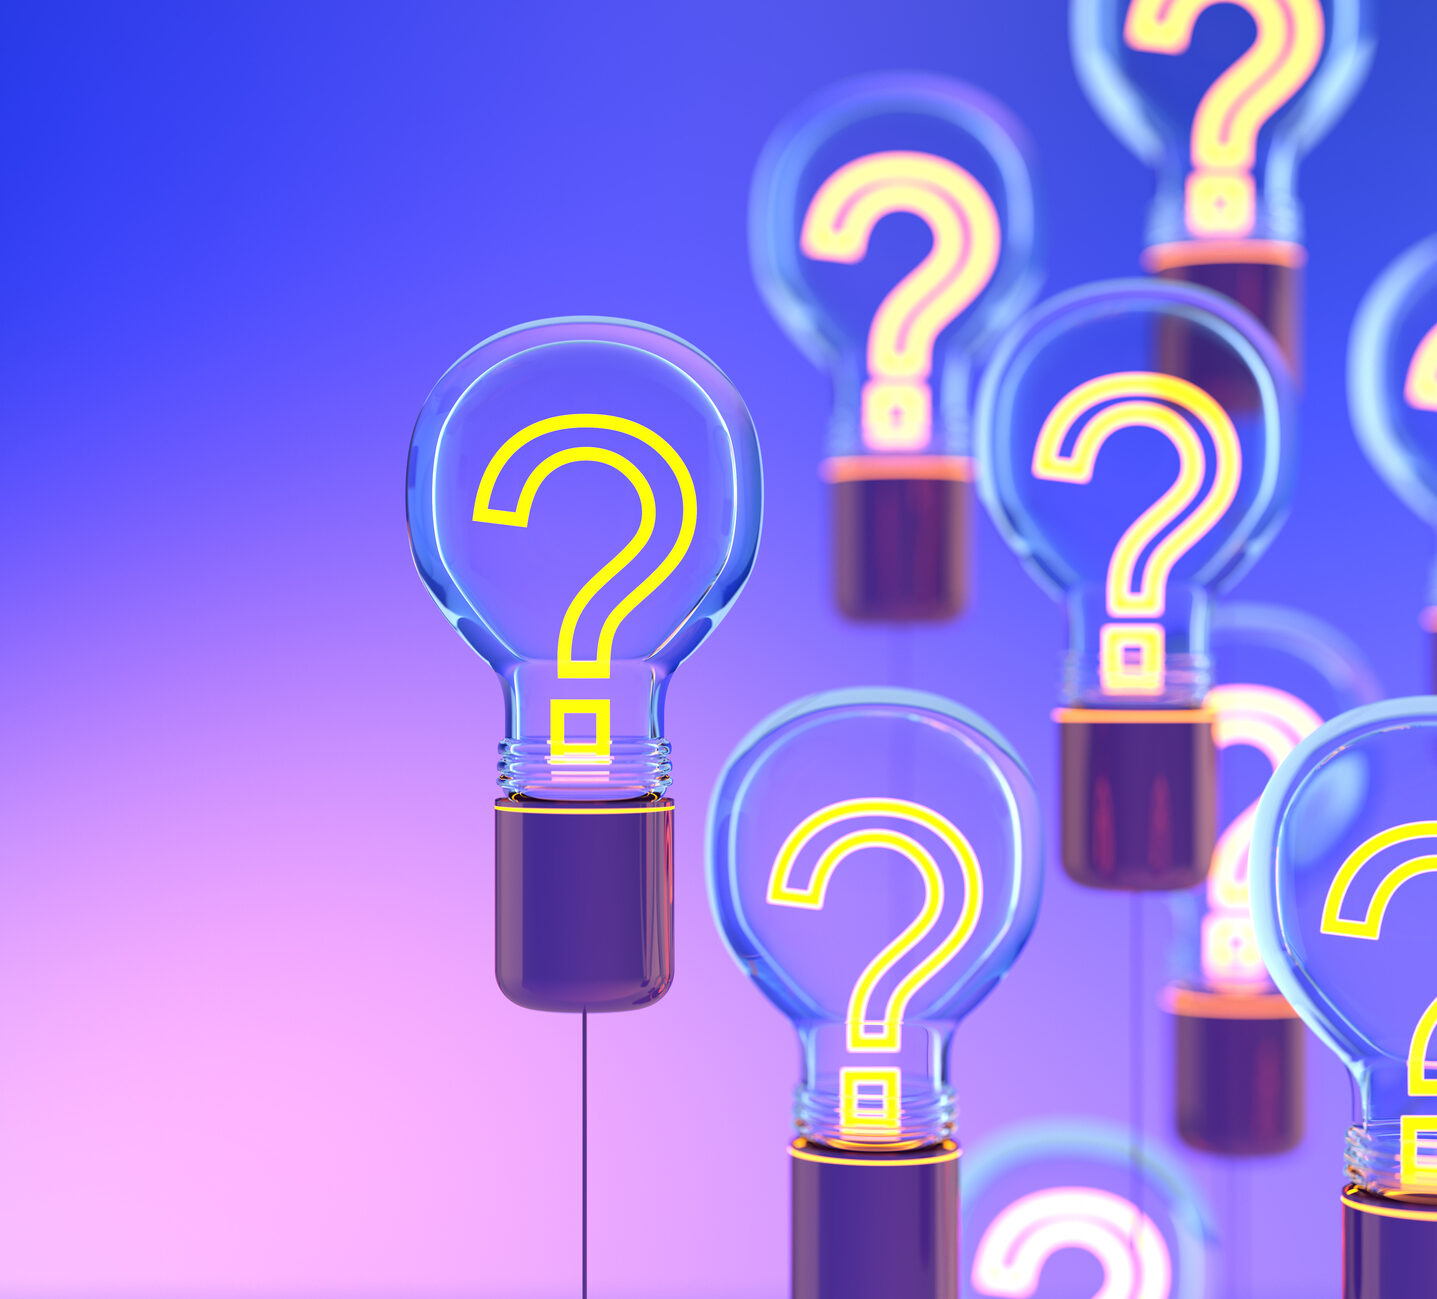 question marks in light bulbs on purple background.